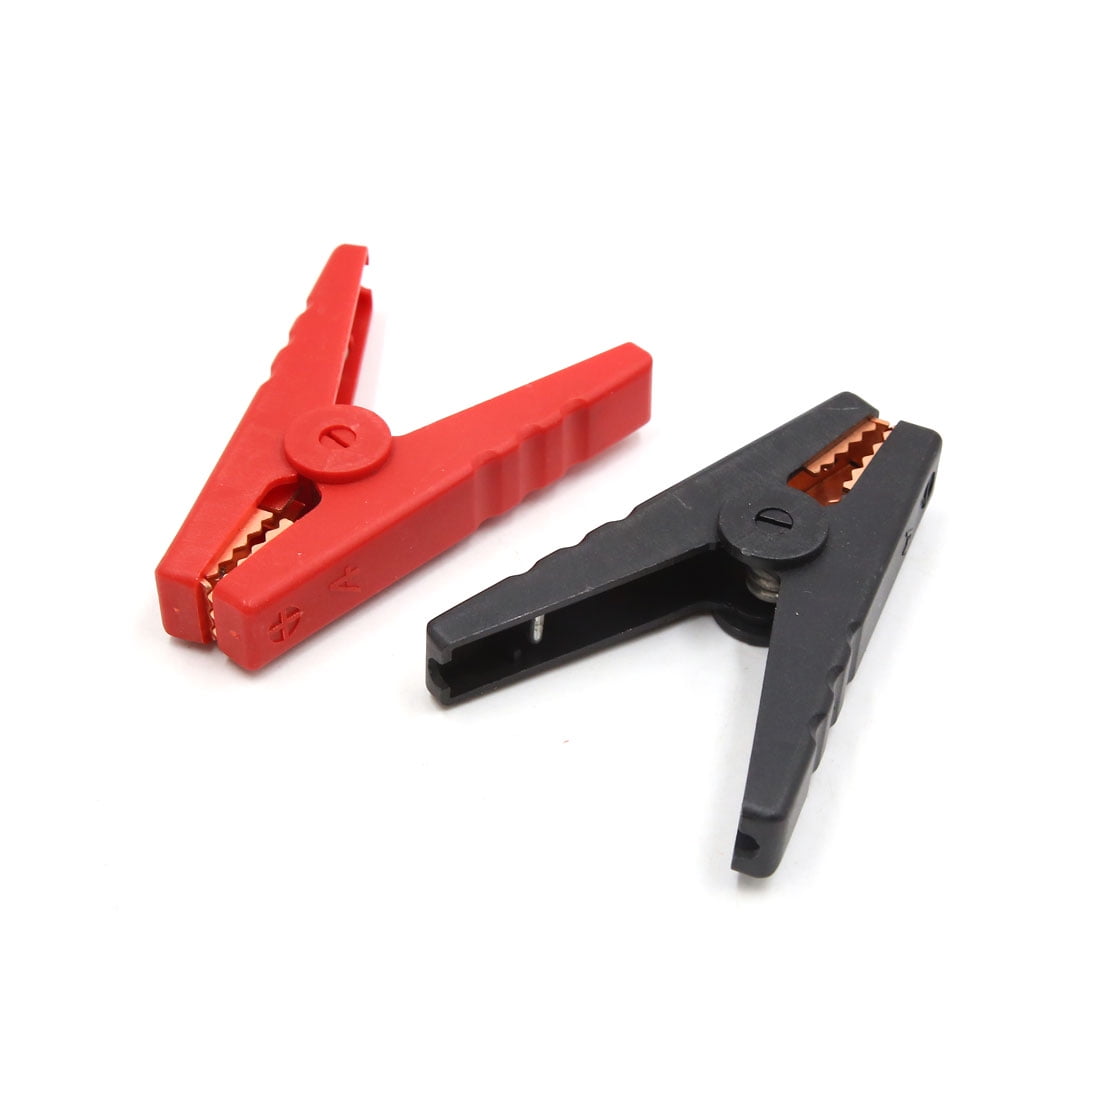 Details about   Boat Car Alligator Clips Insulated Positive Negative Battery Charging Clamps Set 